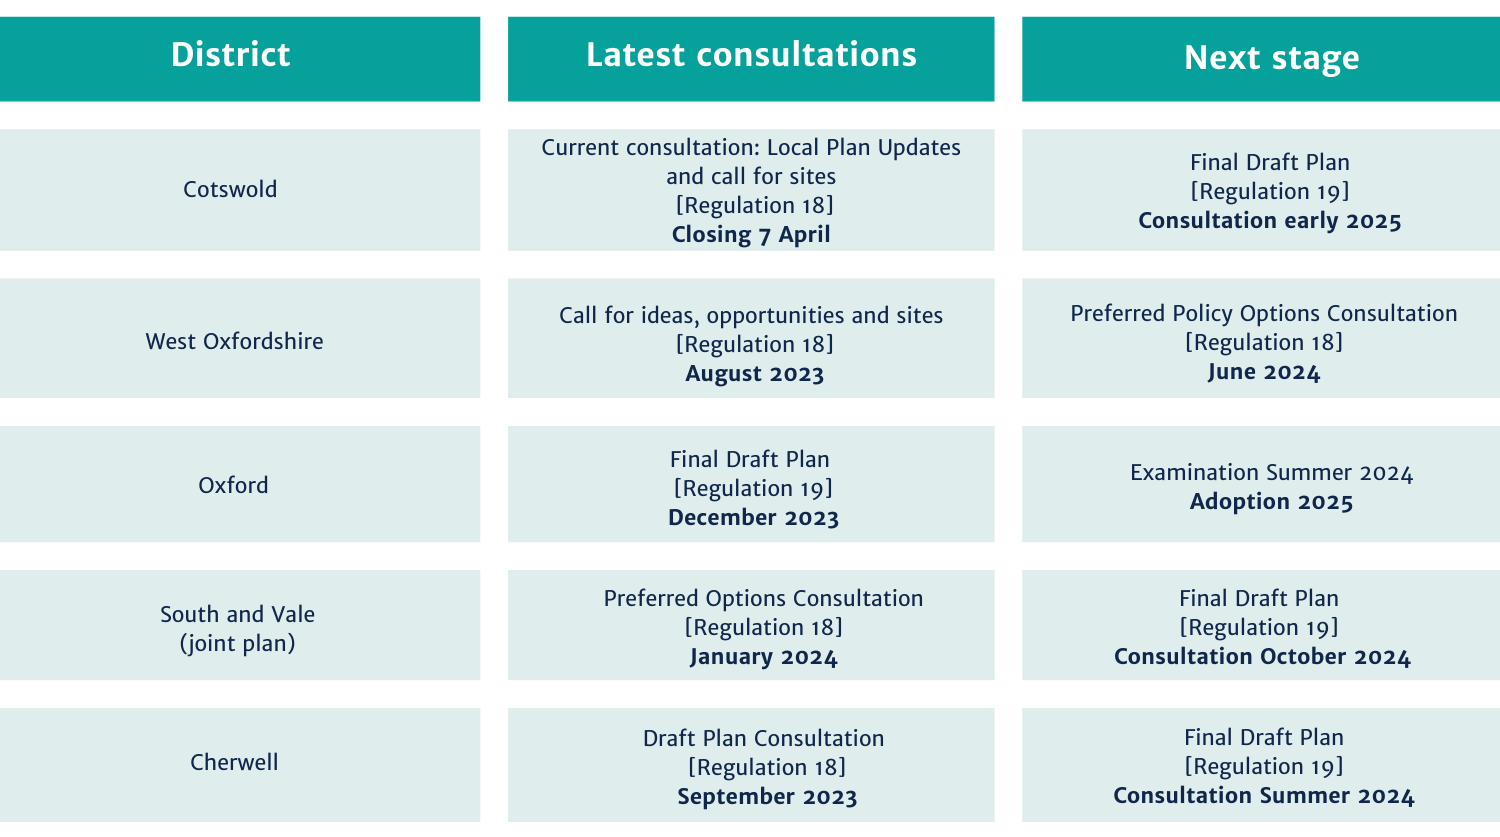 Consultation - upcoming and next stage